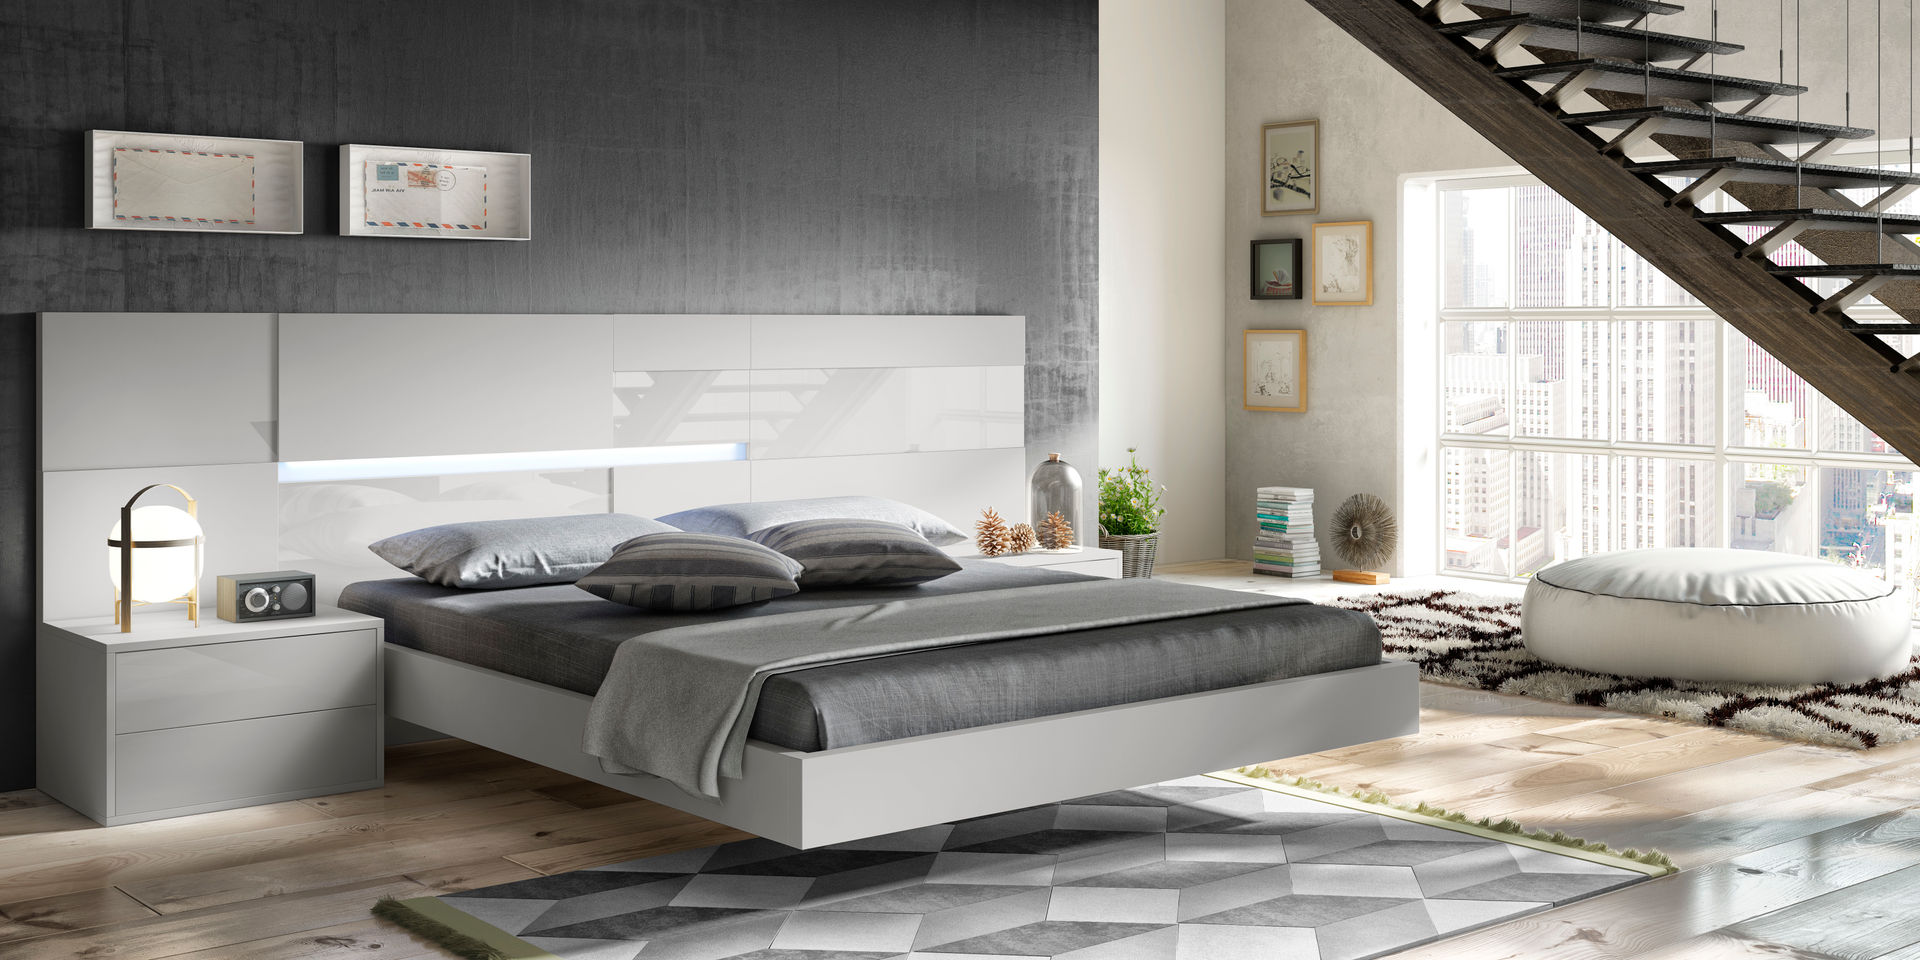 Dive-In, MOBLEC, S.L MOBLEC, S.L Modern style bedroom Beds & headboards